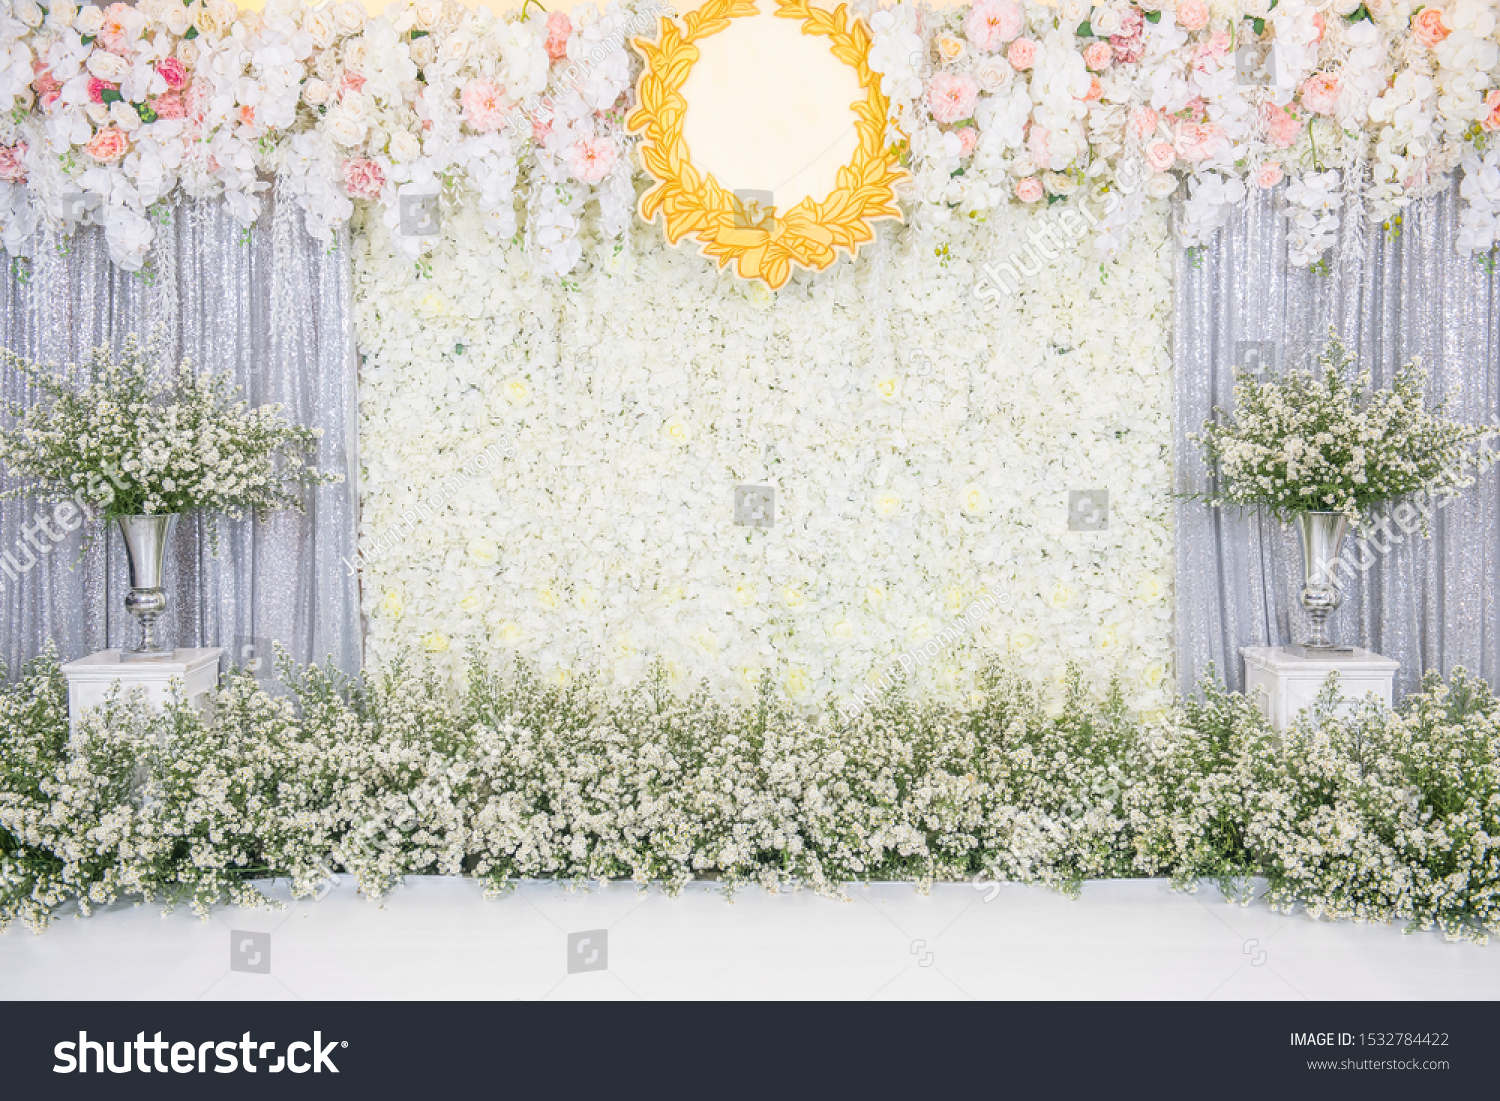 Beautiful wedding flower backdrop For taking pictures.Beautiful wedding flower backdrop For taking pictures. #1532784422